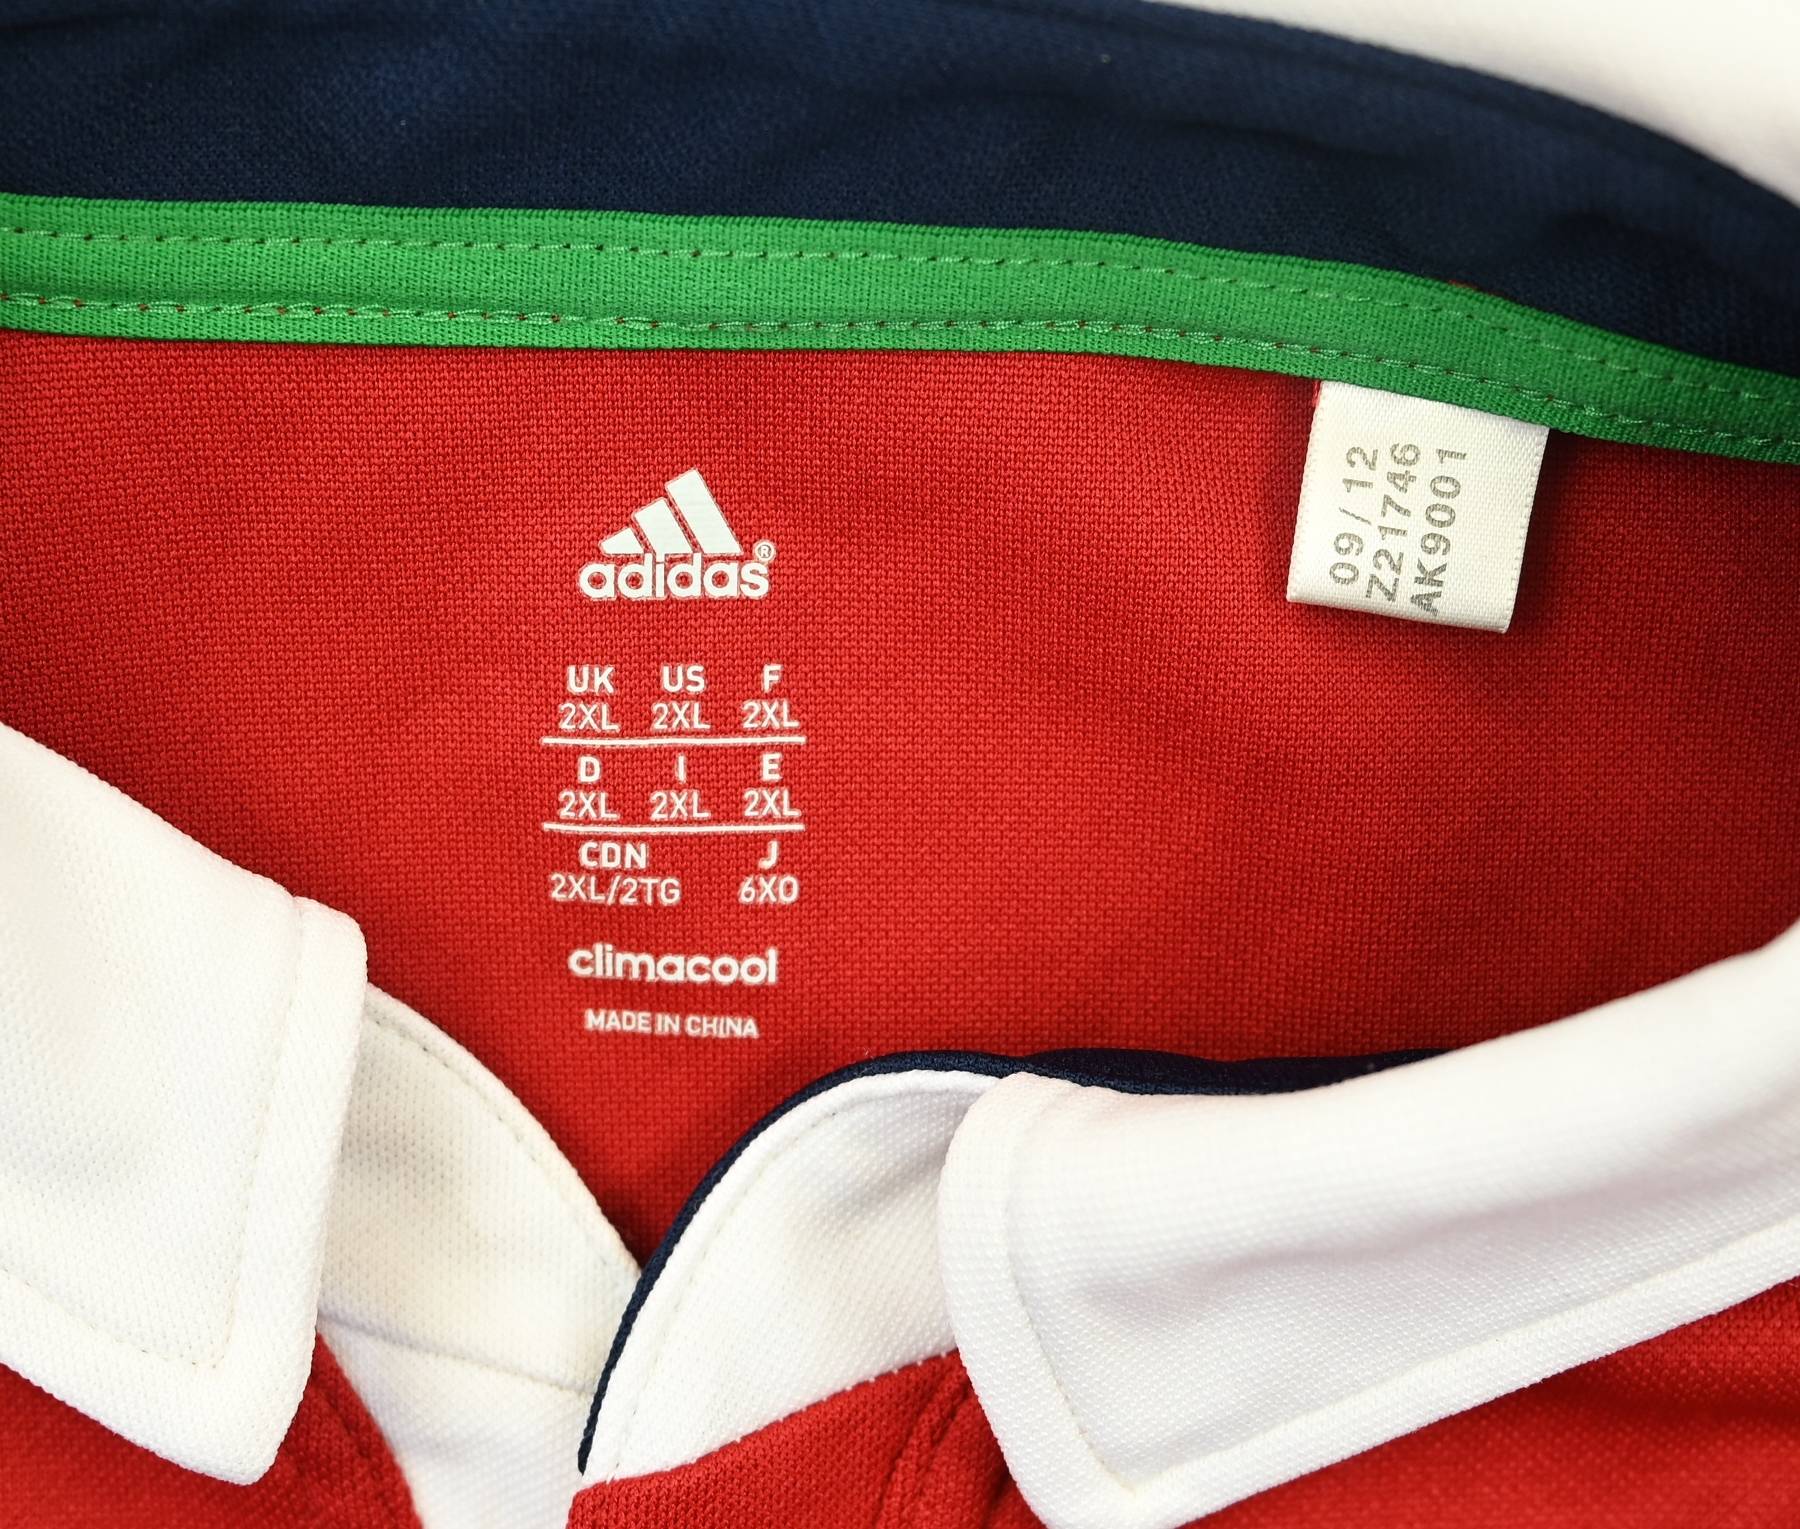 BRITISH AND IRISH LIONS RUGBY SHIRT XXL Rugby \ Rugby Union ...